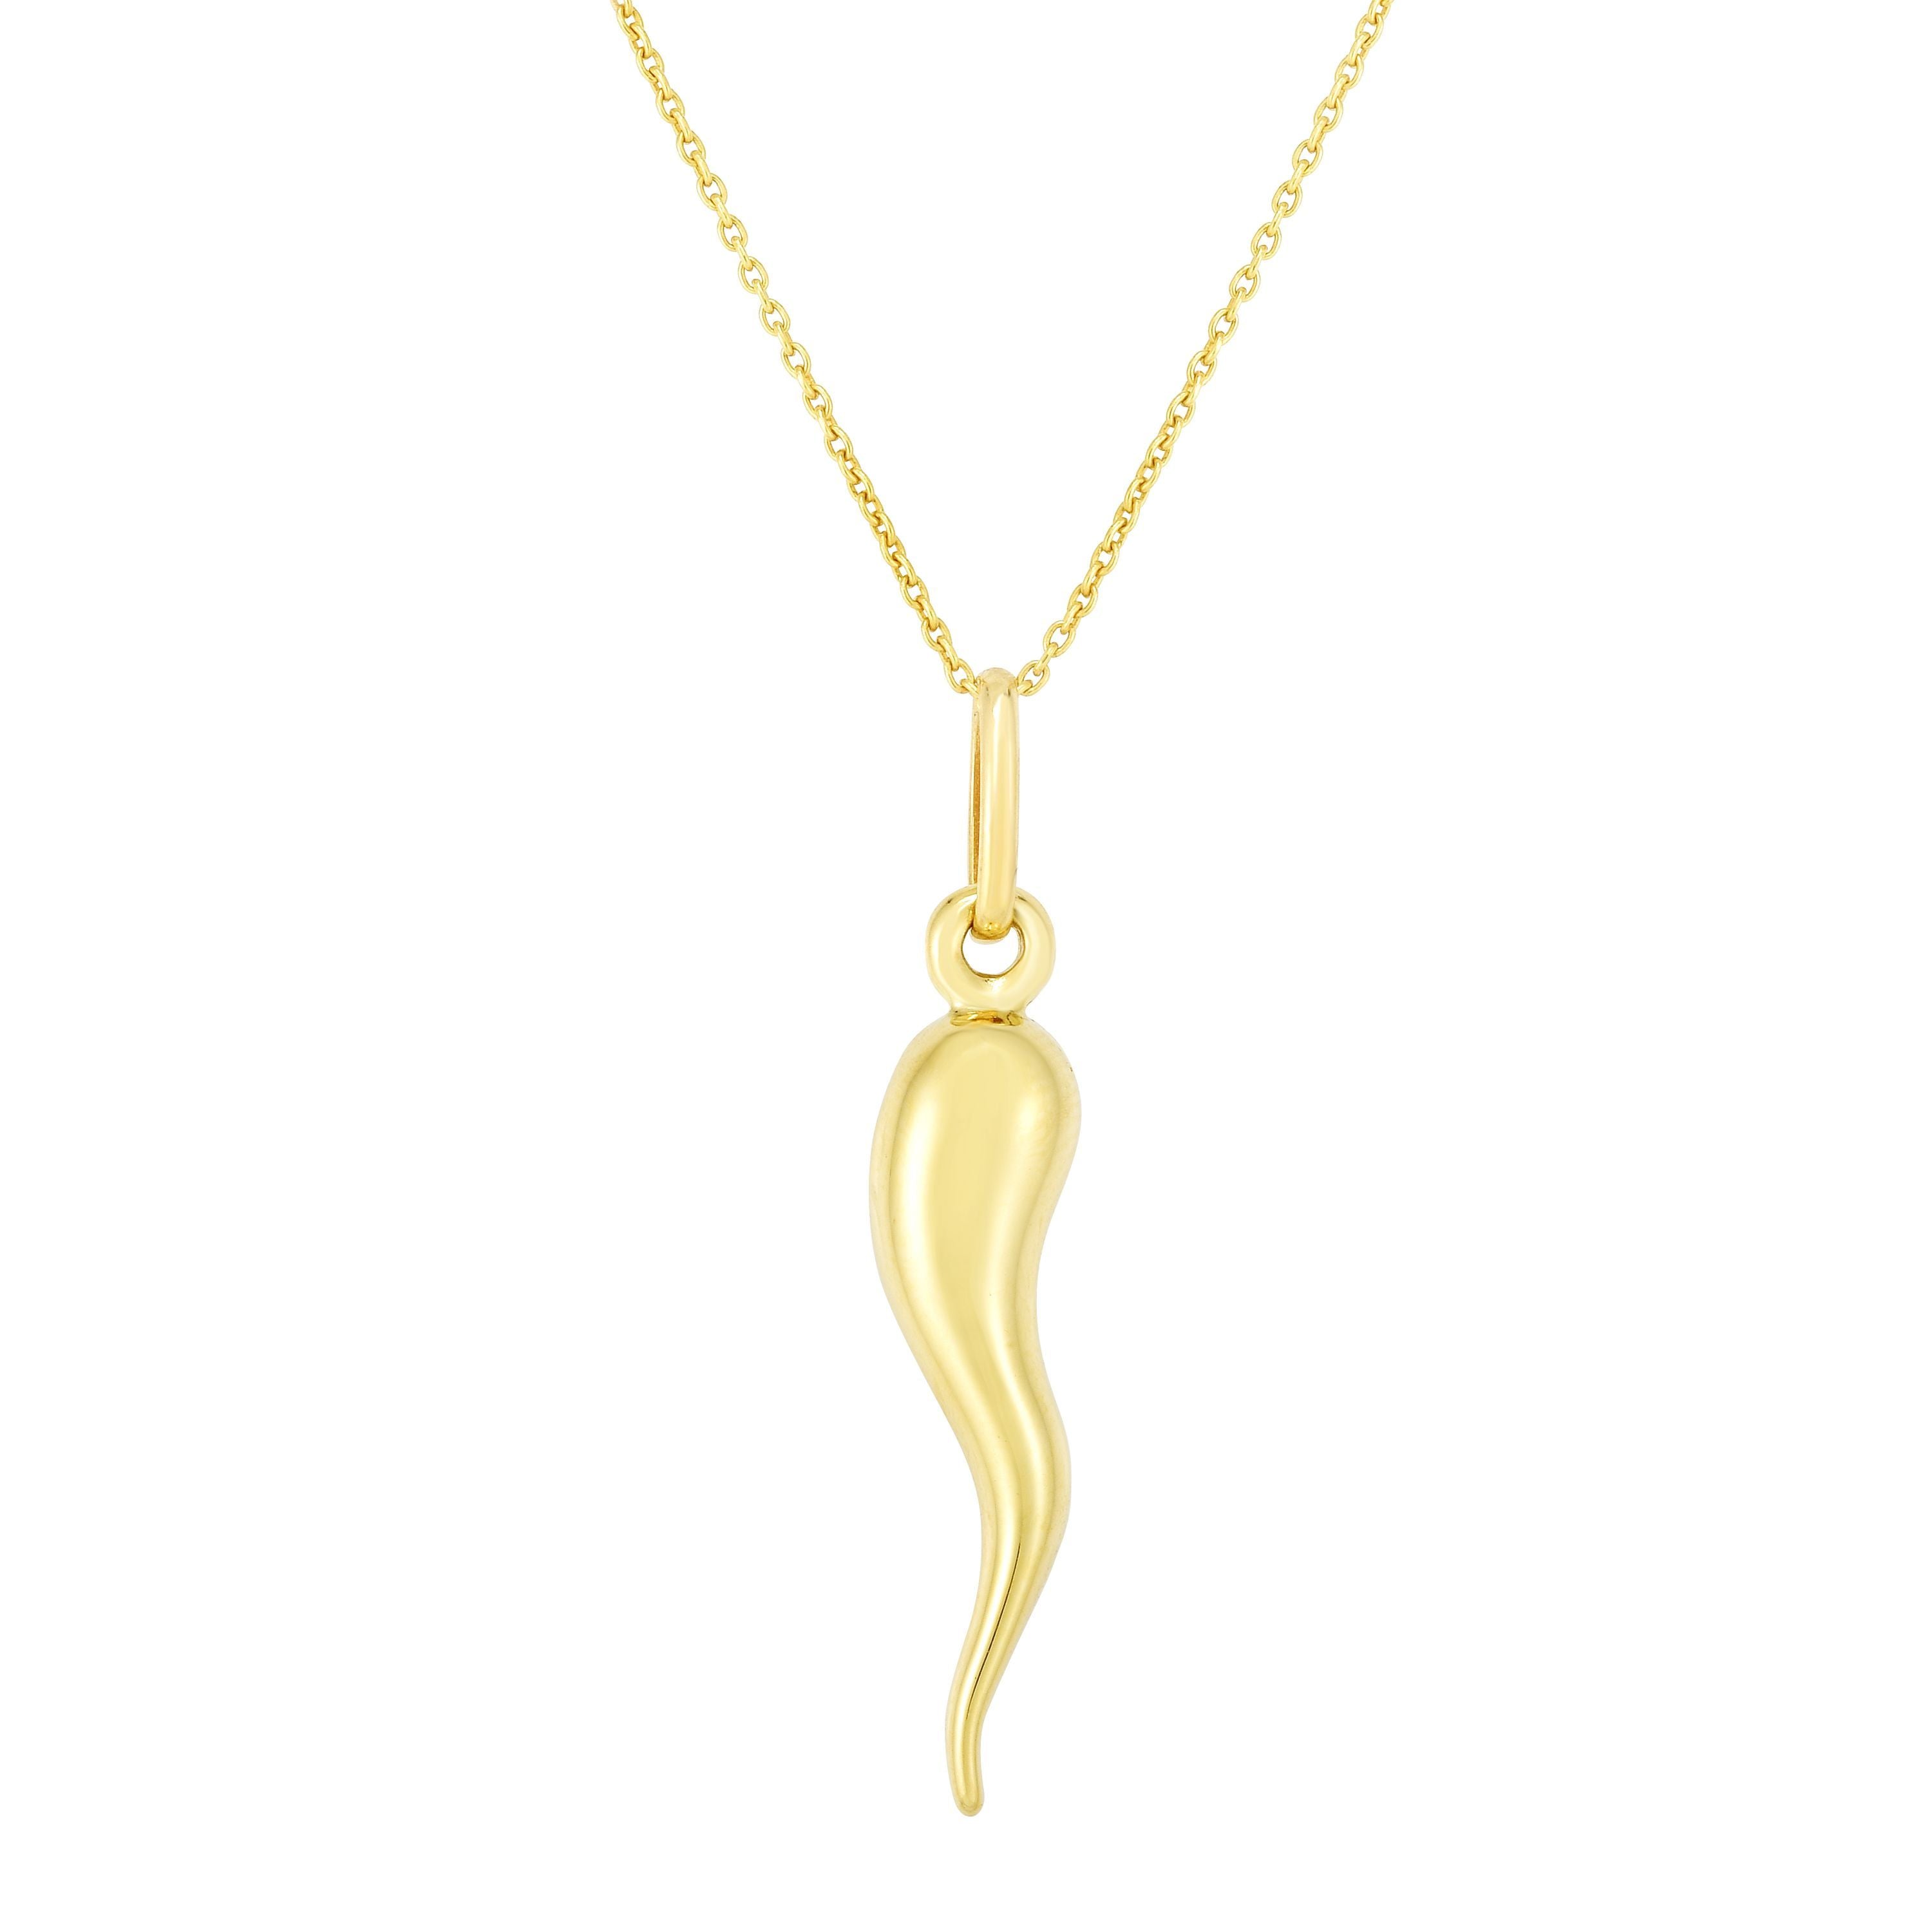 14k Yellow Gold Flame Pendant Necklace, 18"